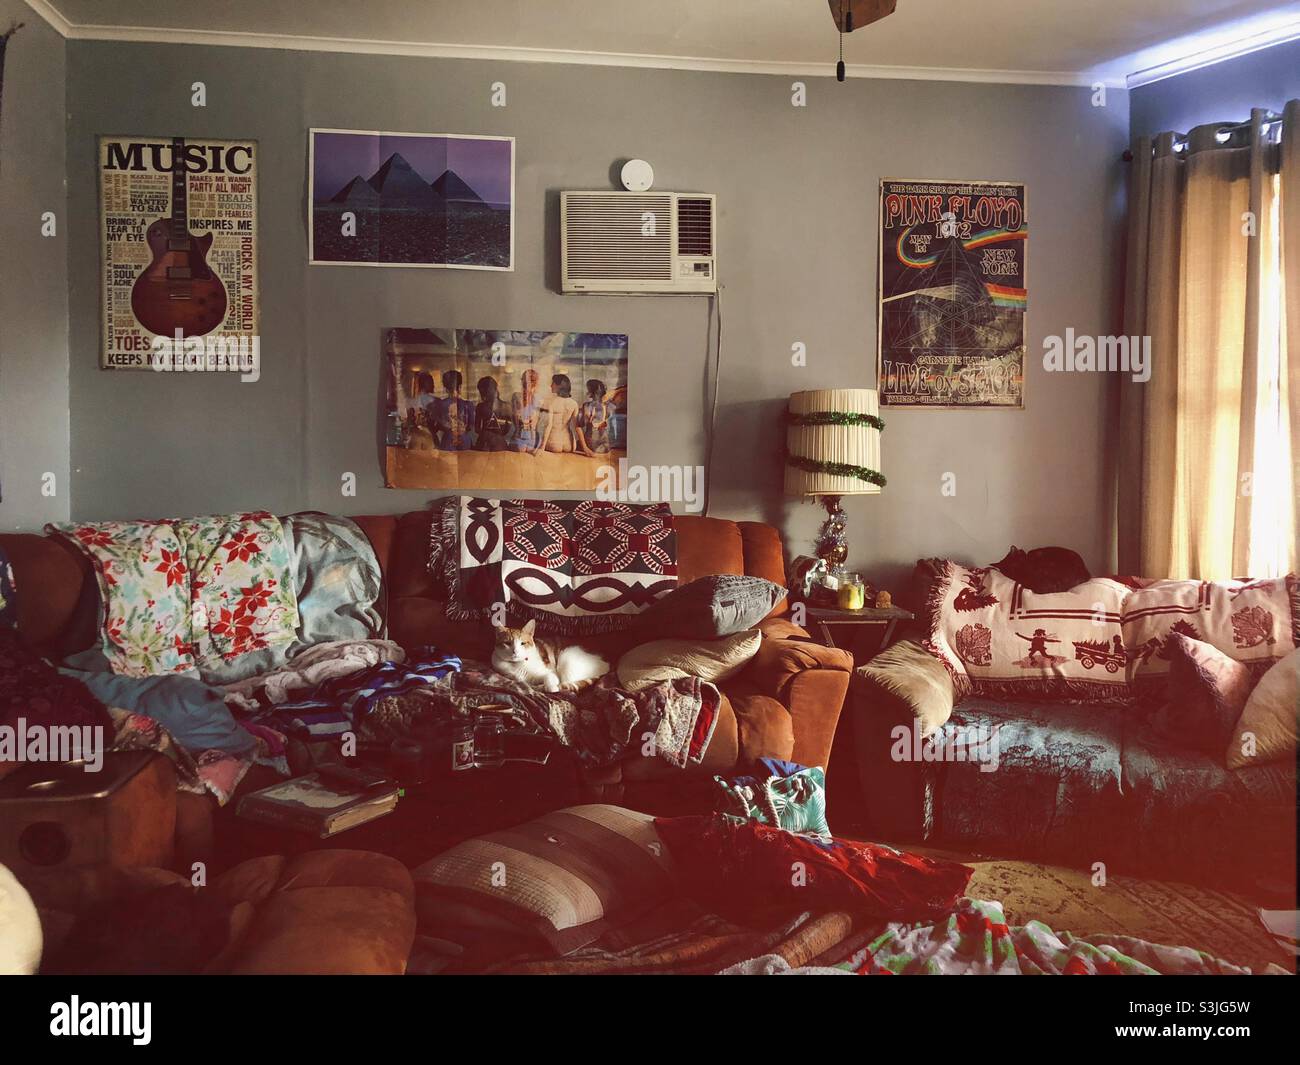 Cozy Retro Style Living Room With Music Posters And Cats Stock Photo - Alamy